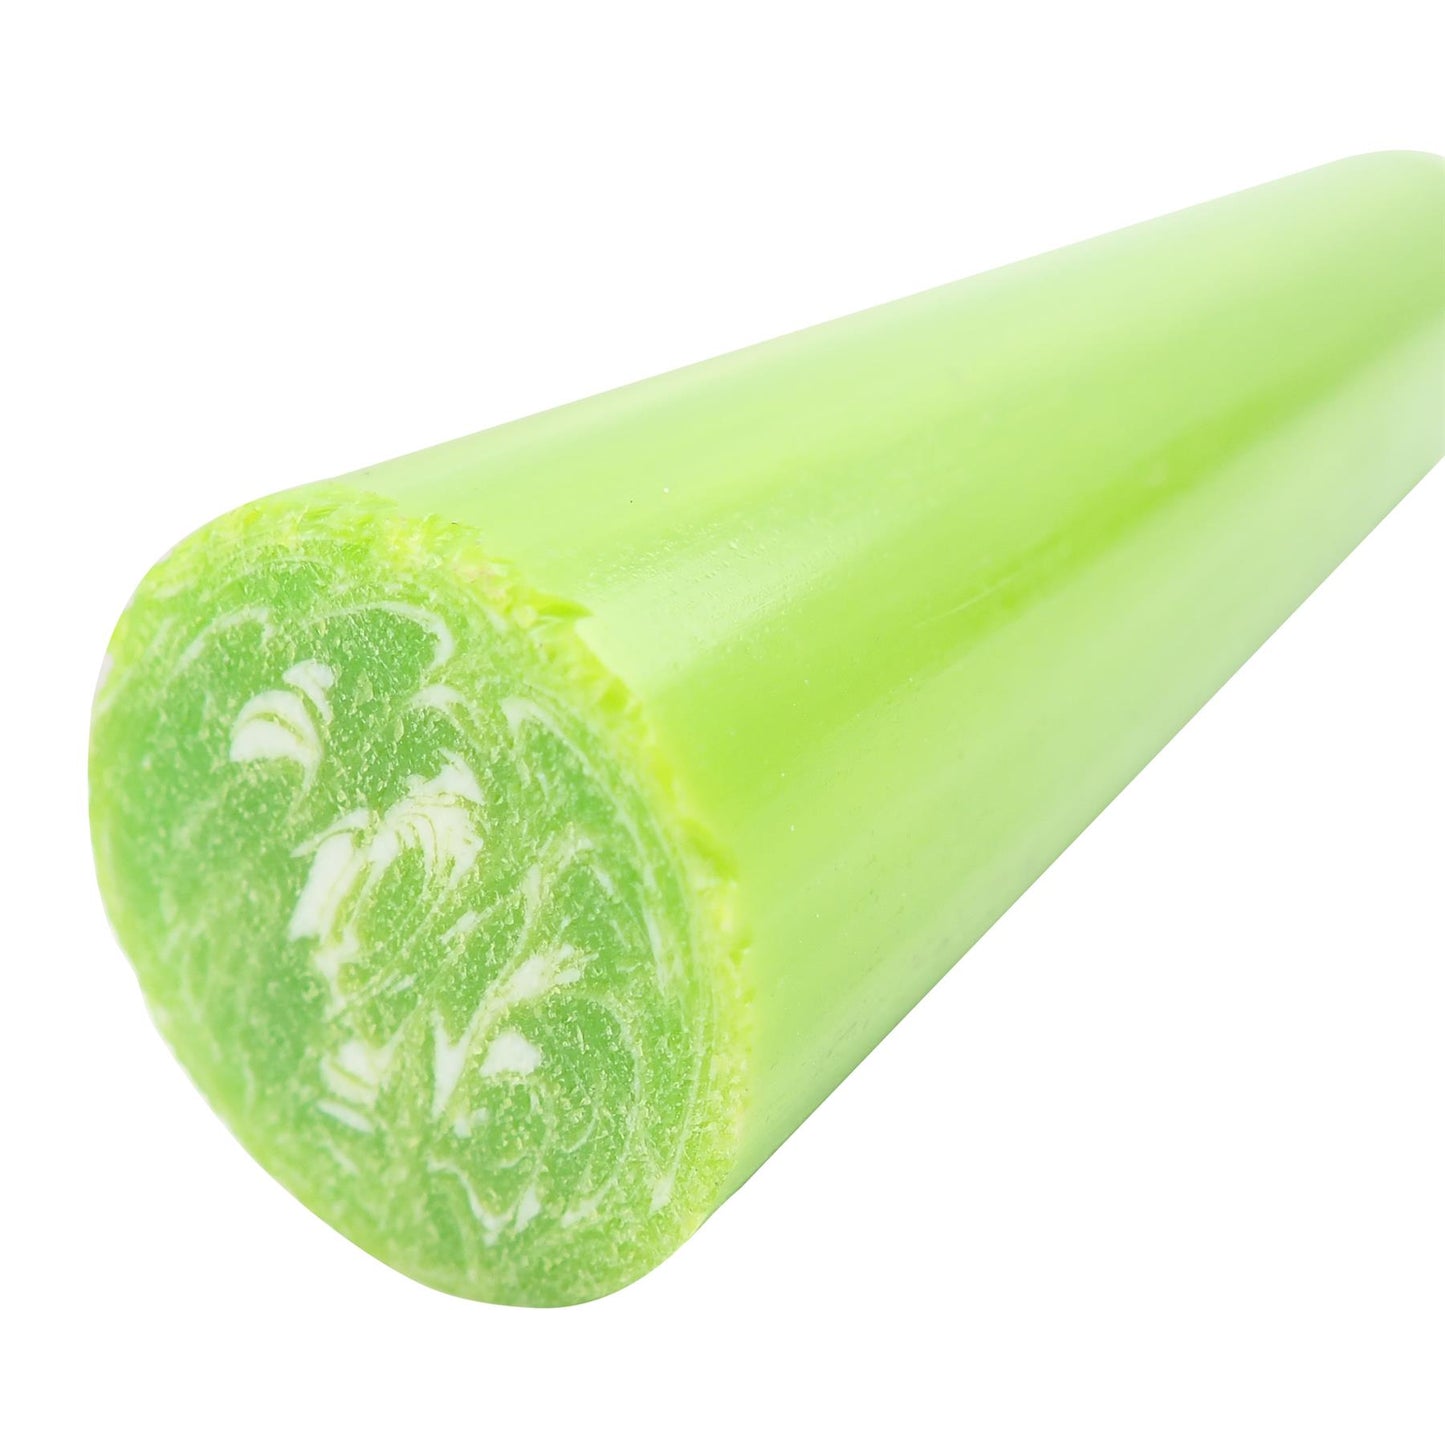 Turners' Mill Lime Green Polyester Turning Blank - 150x45x45mm